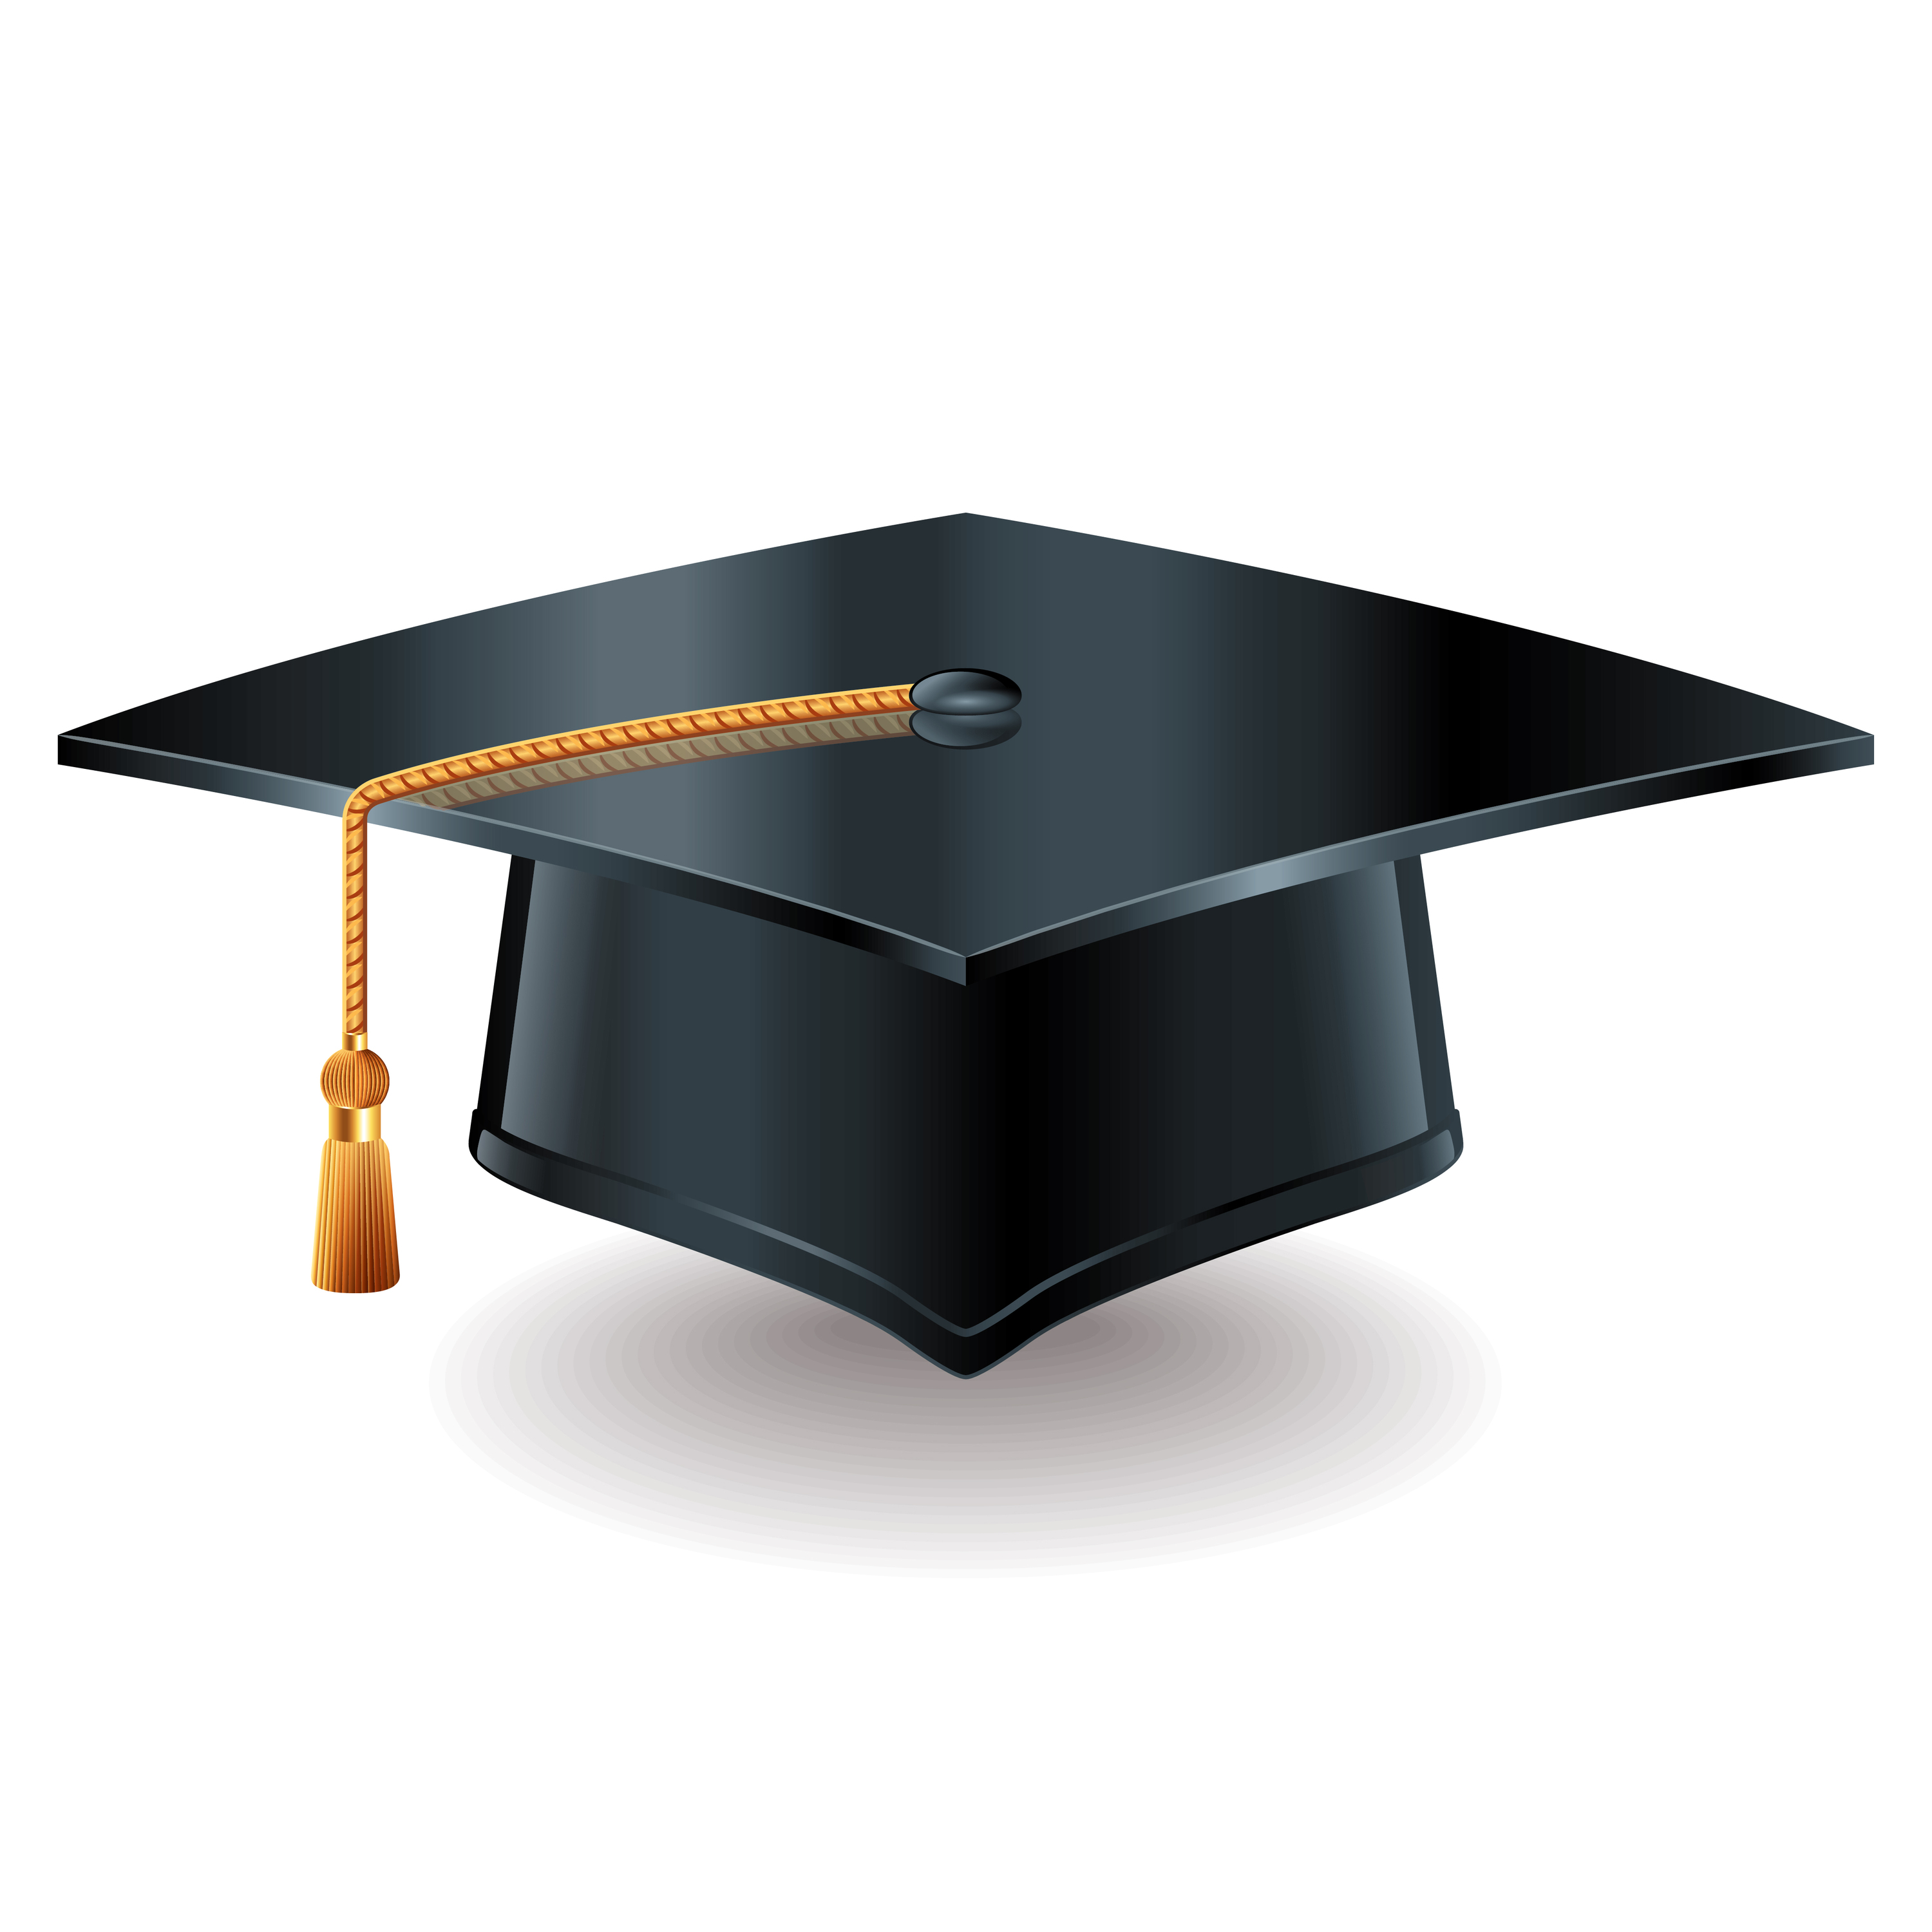 Download Graduation Cap Png Free Png Images Toppng Images